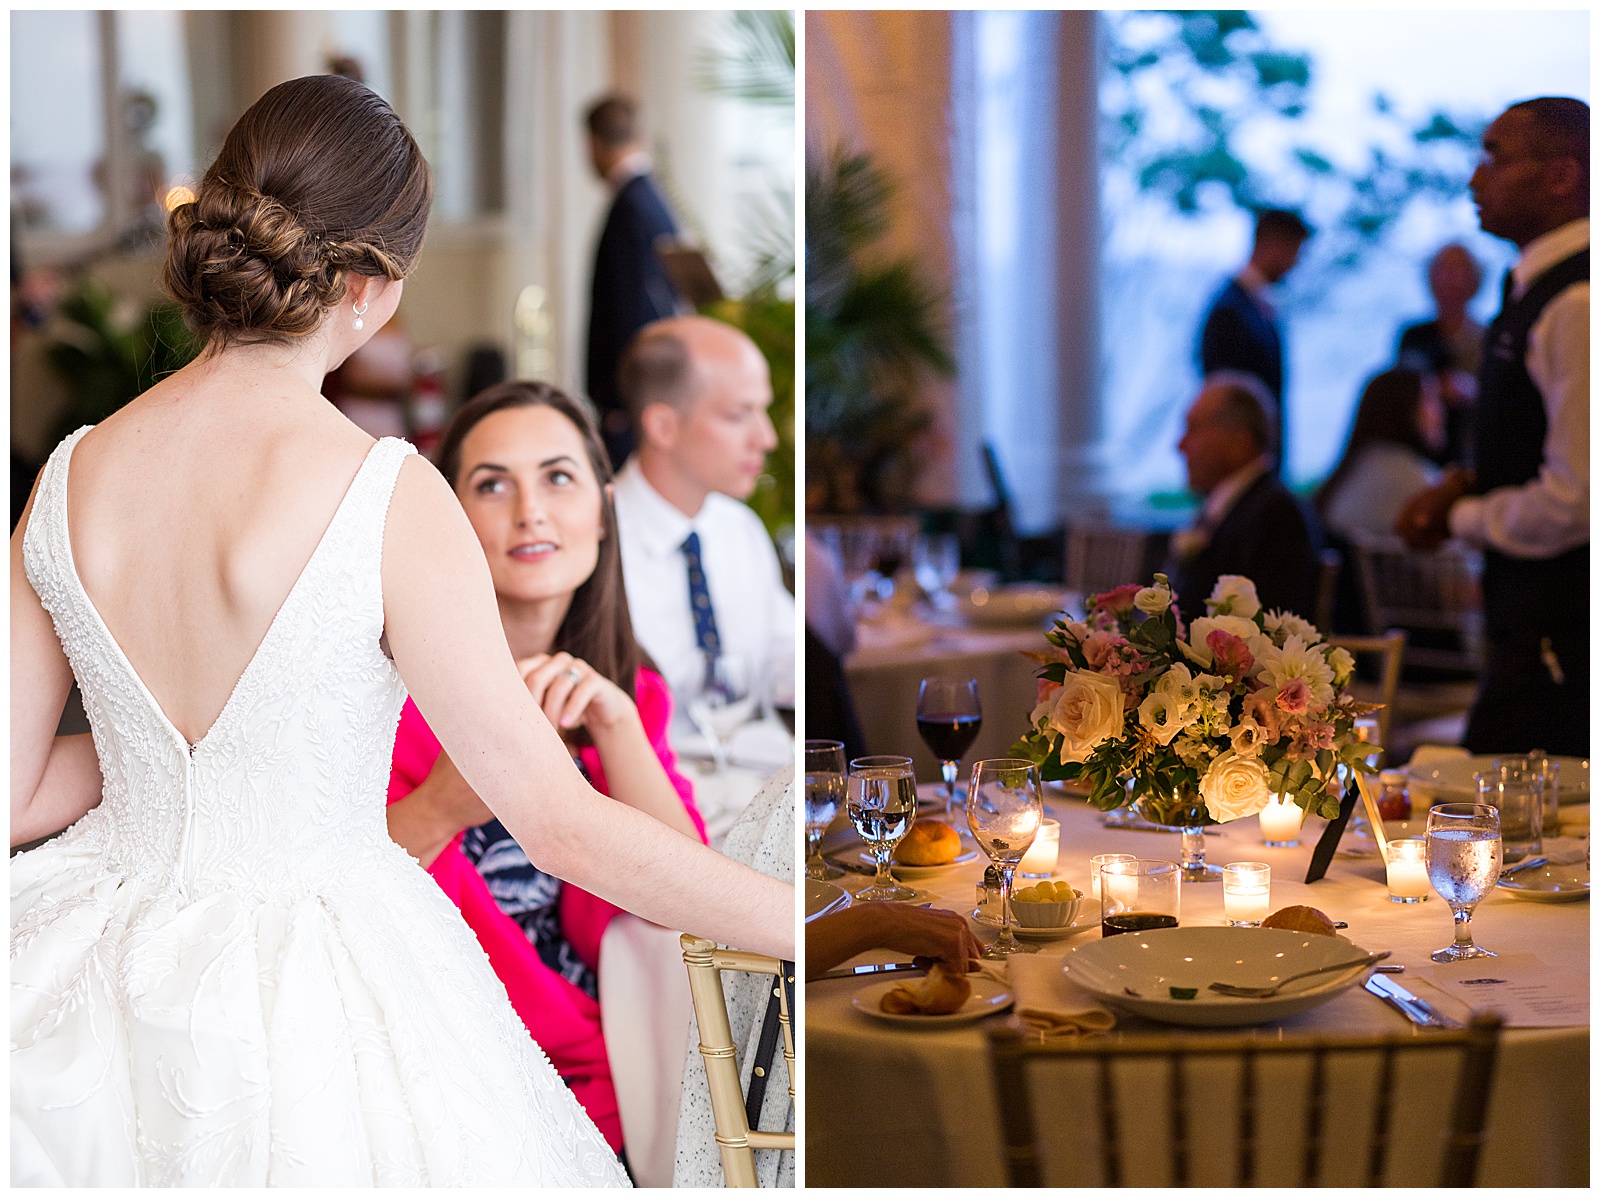 The Chanler Newport wedding details at the reception